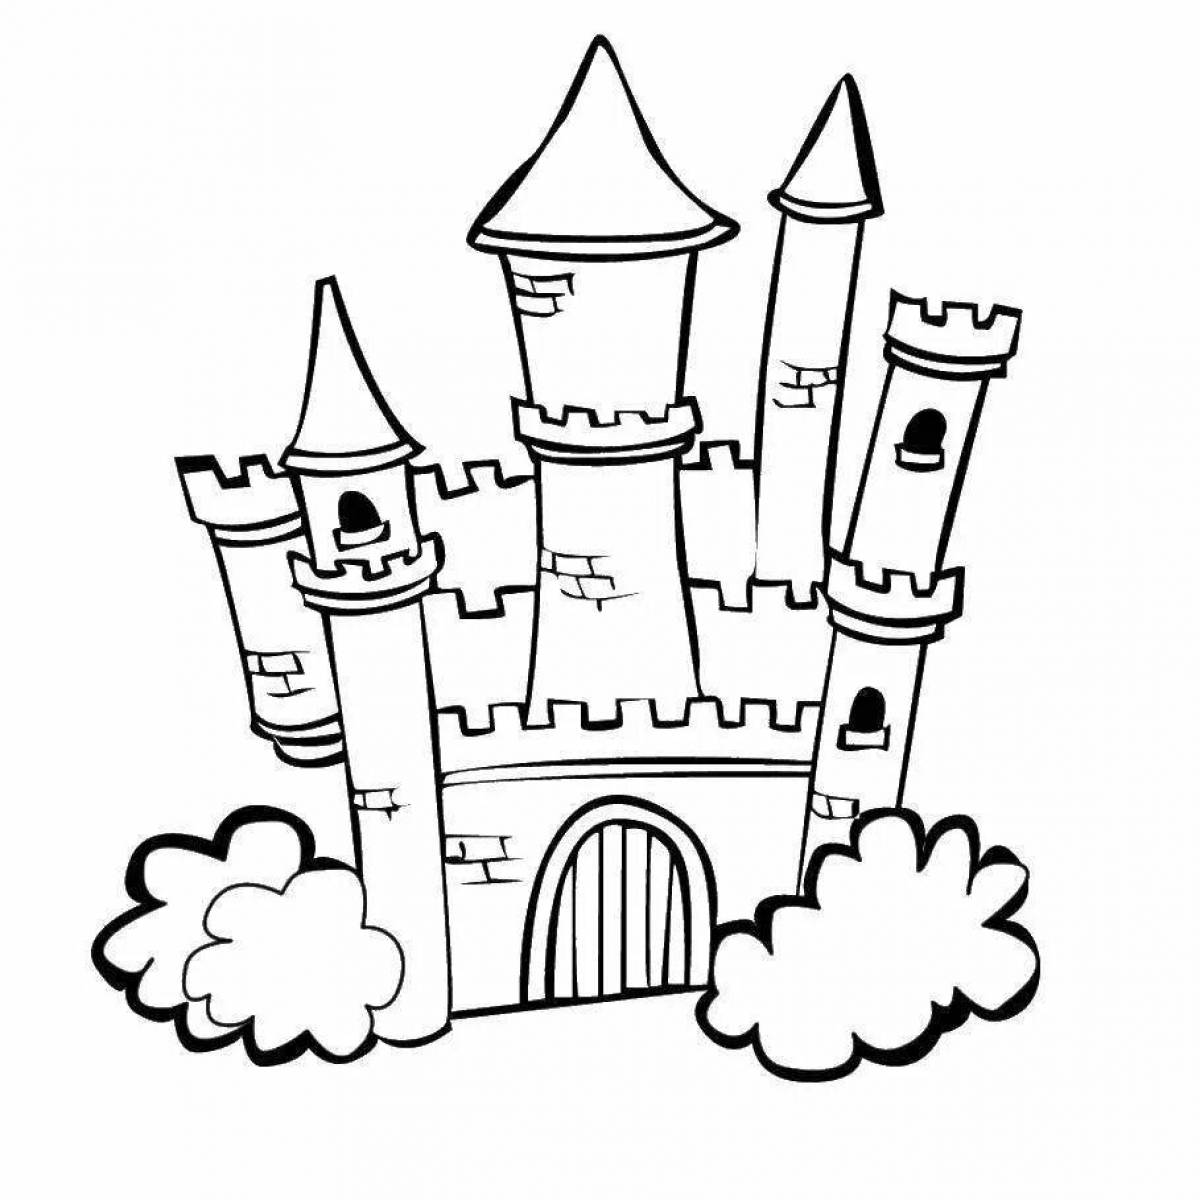 Impressive coloring book for girls with houses and castles